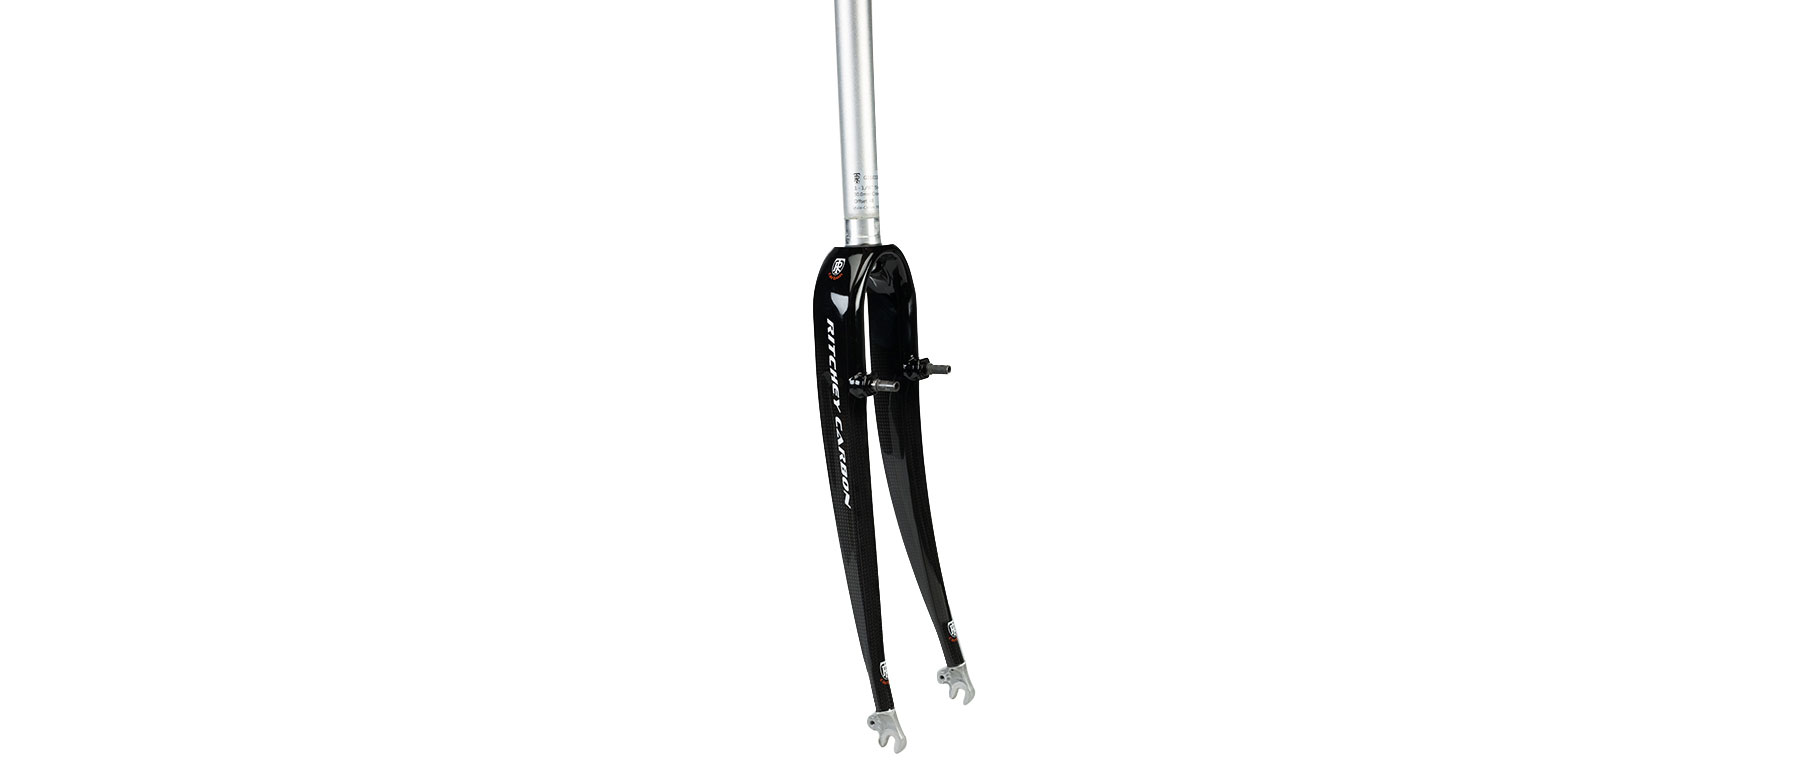 Ritchey Cross Comp Carbon Fork